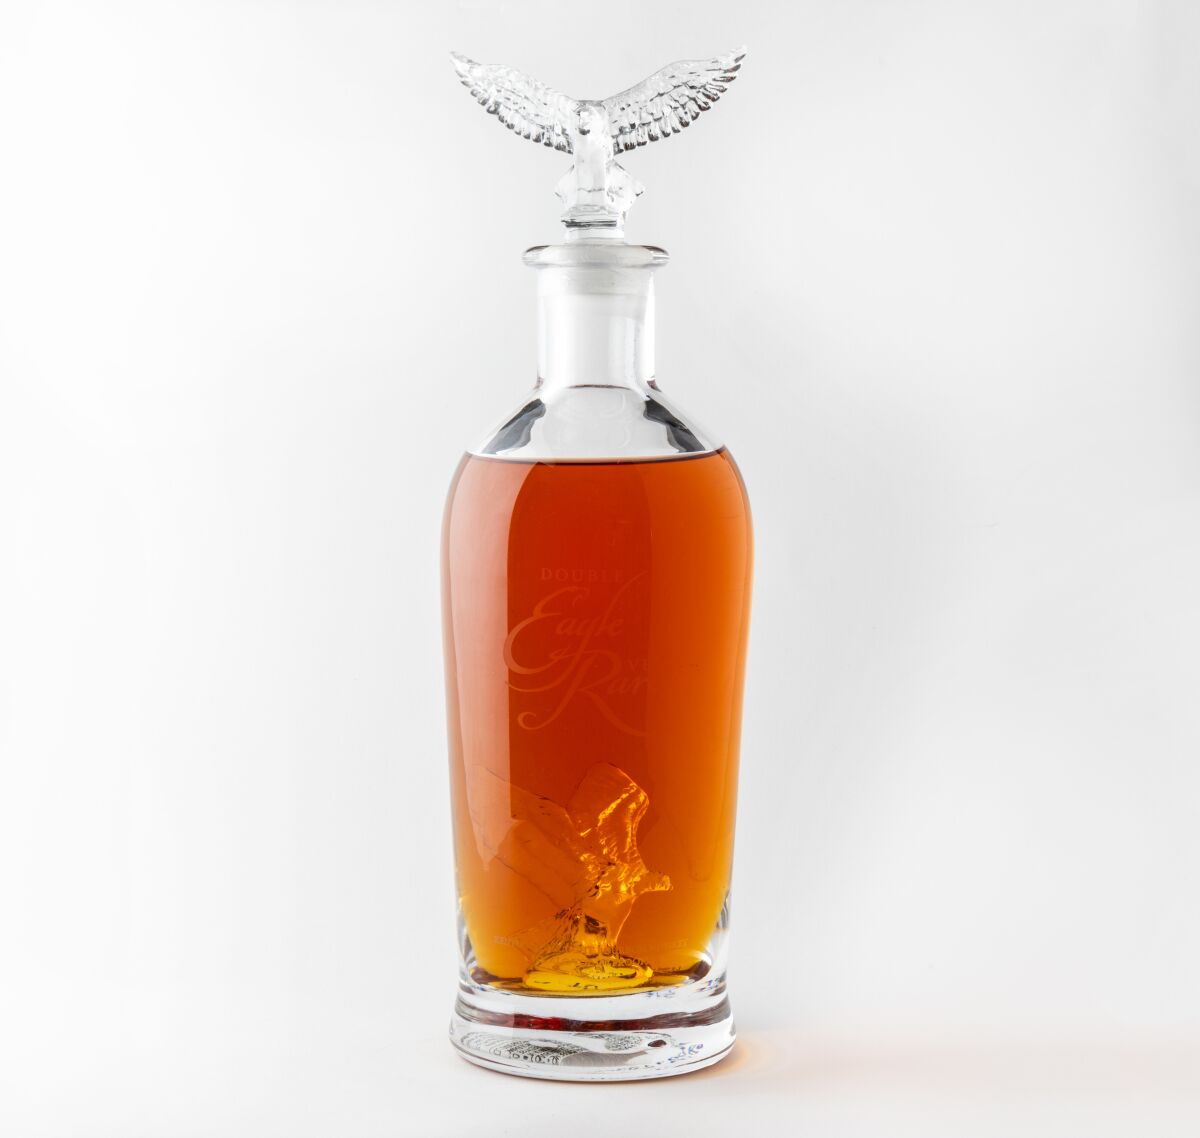 A glass bottle filled with brown-colored bourbon and topped with an spread-wing eagle stopper. 